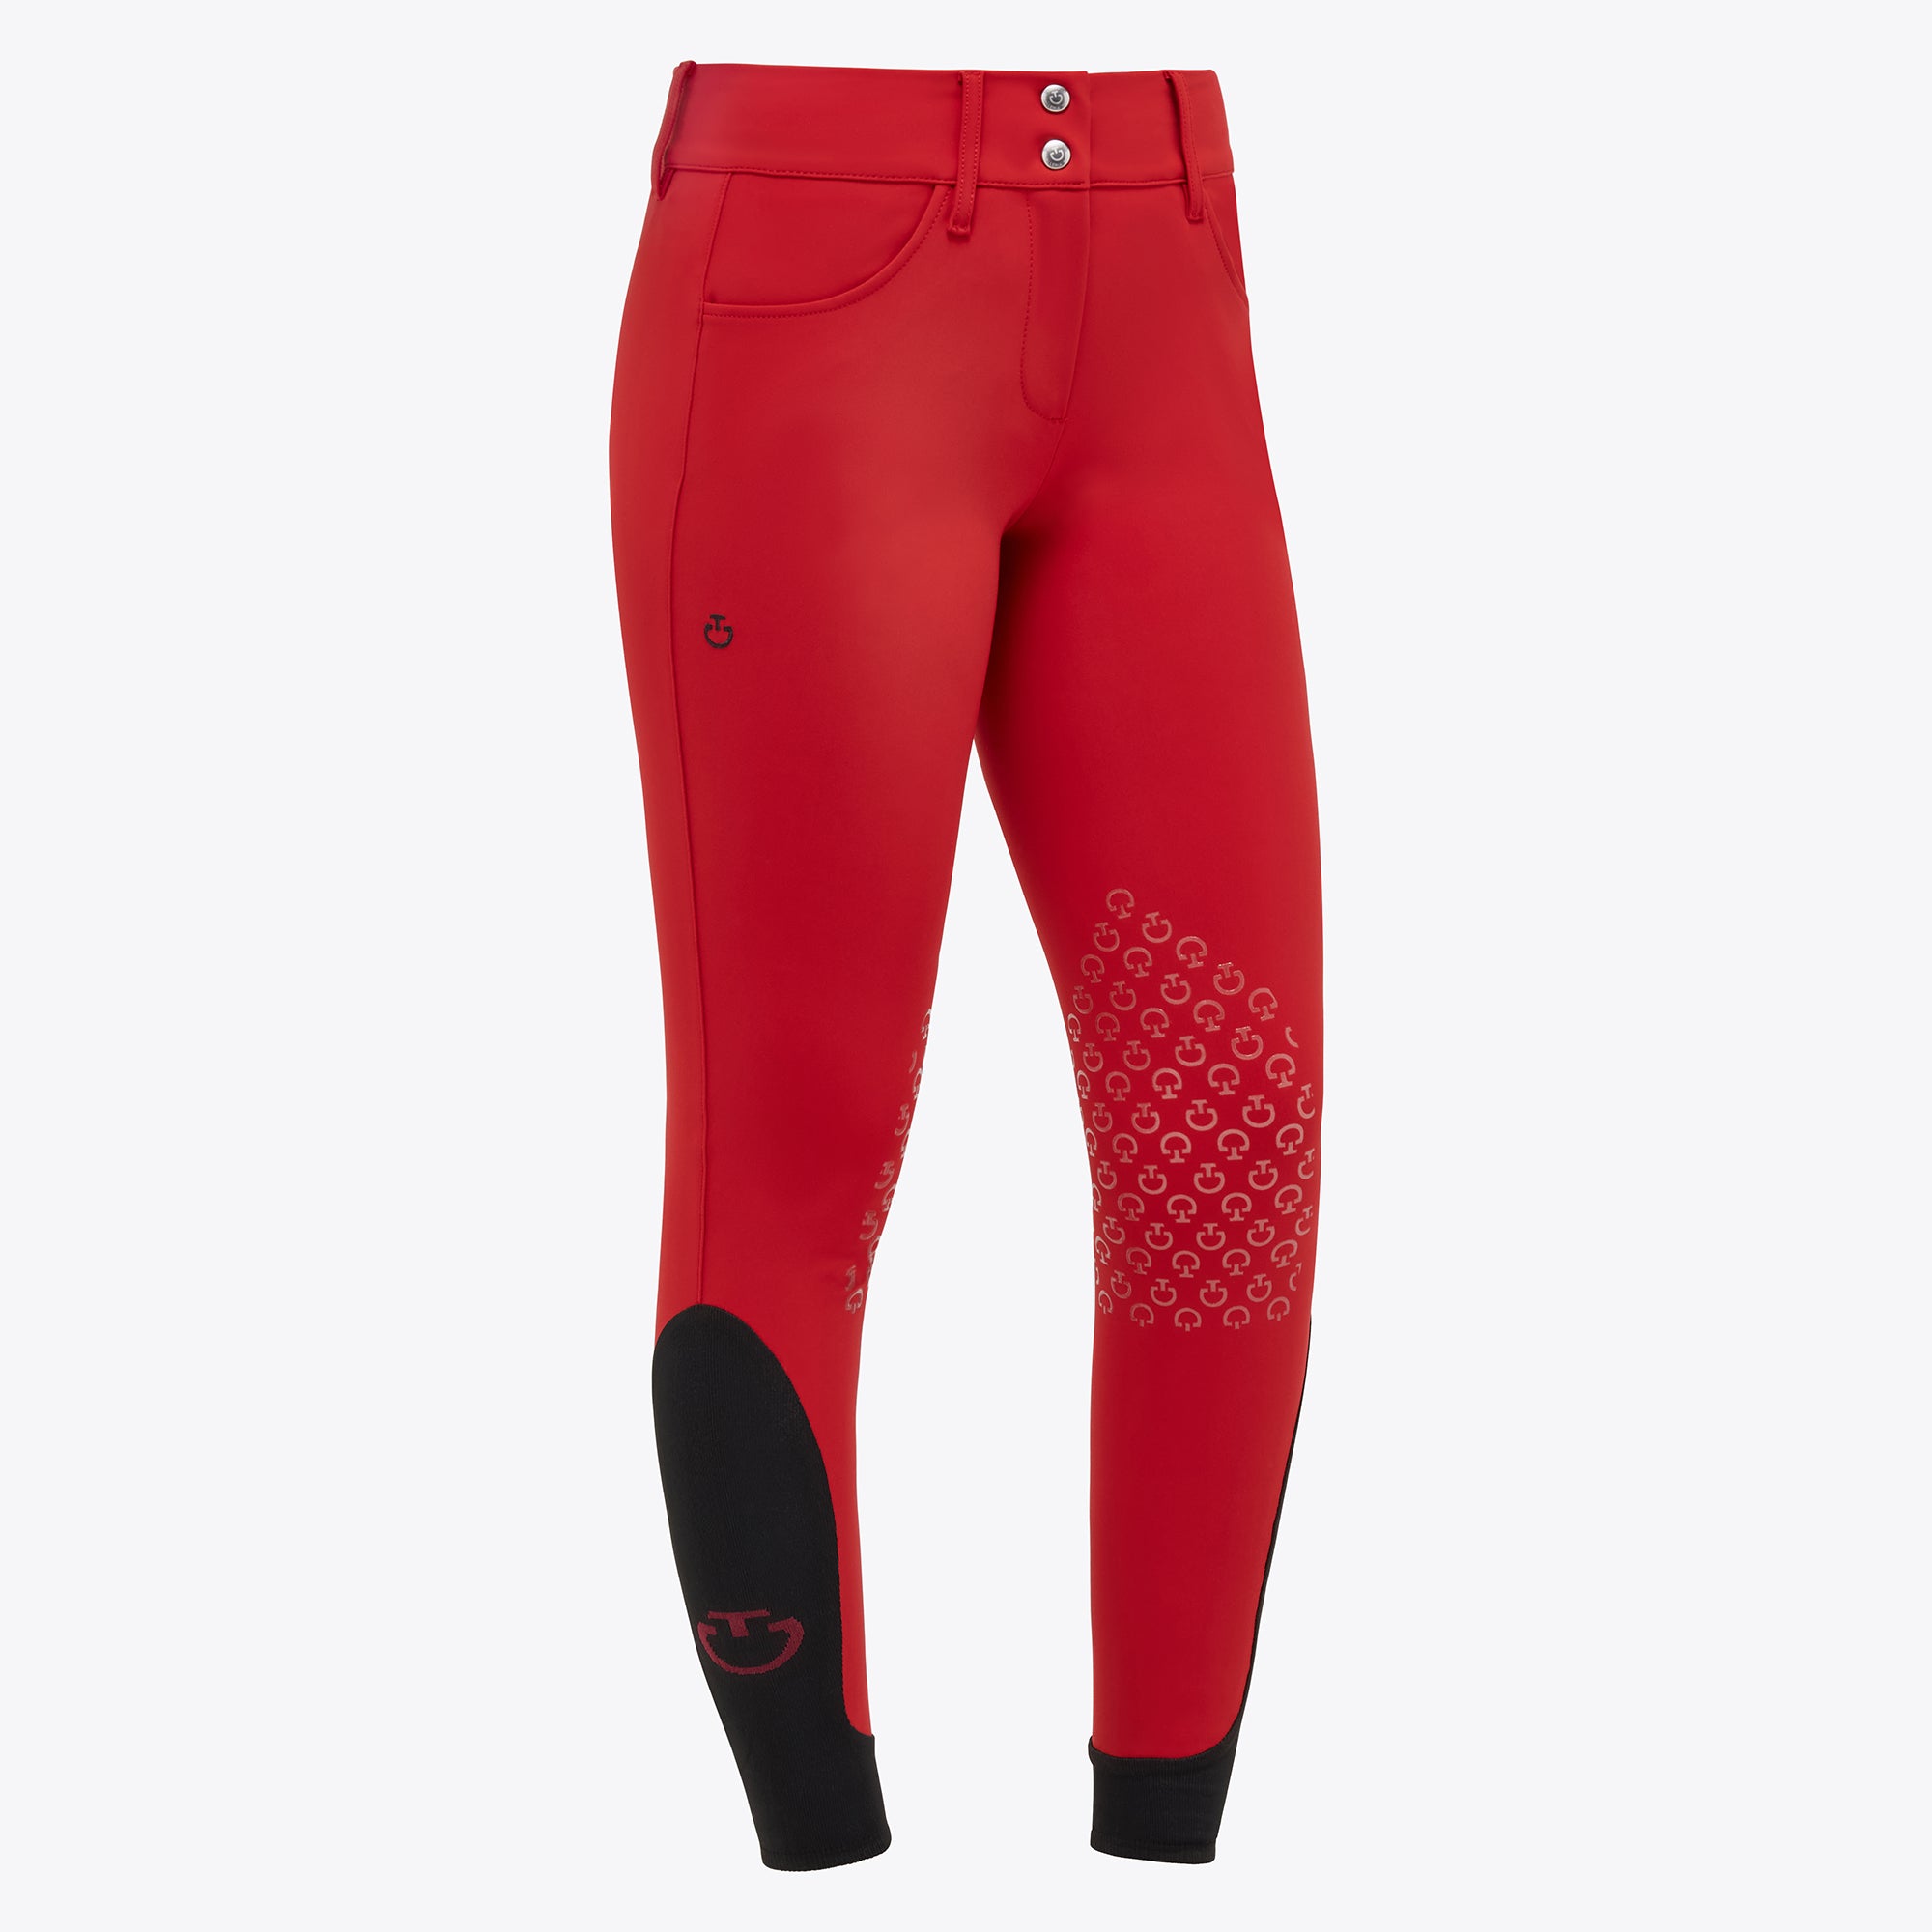 Women's breeches with a high waist in red